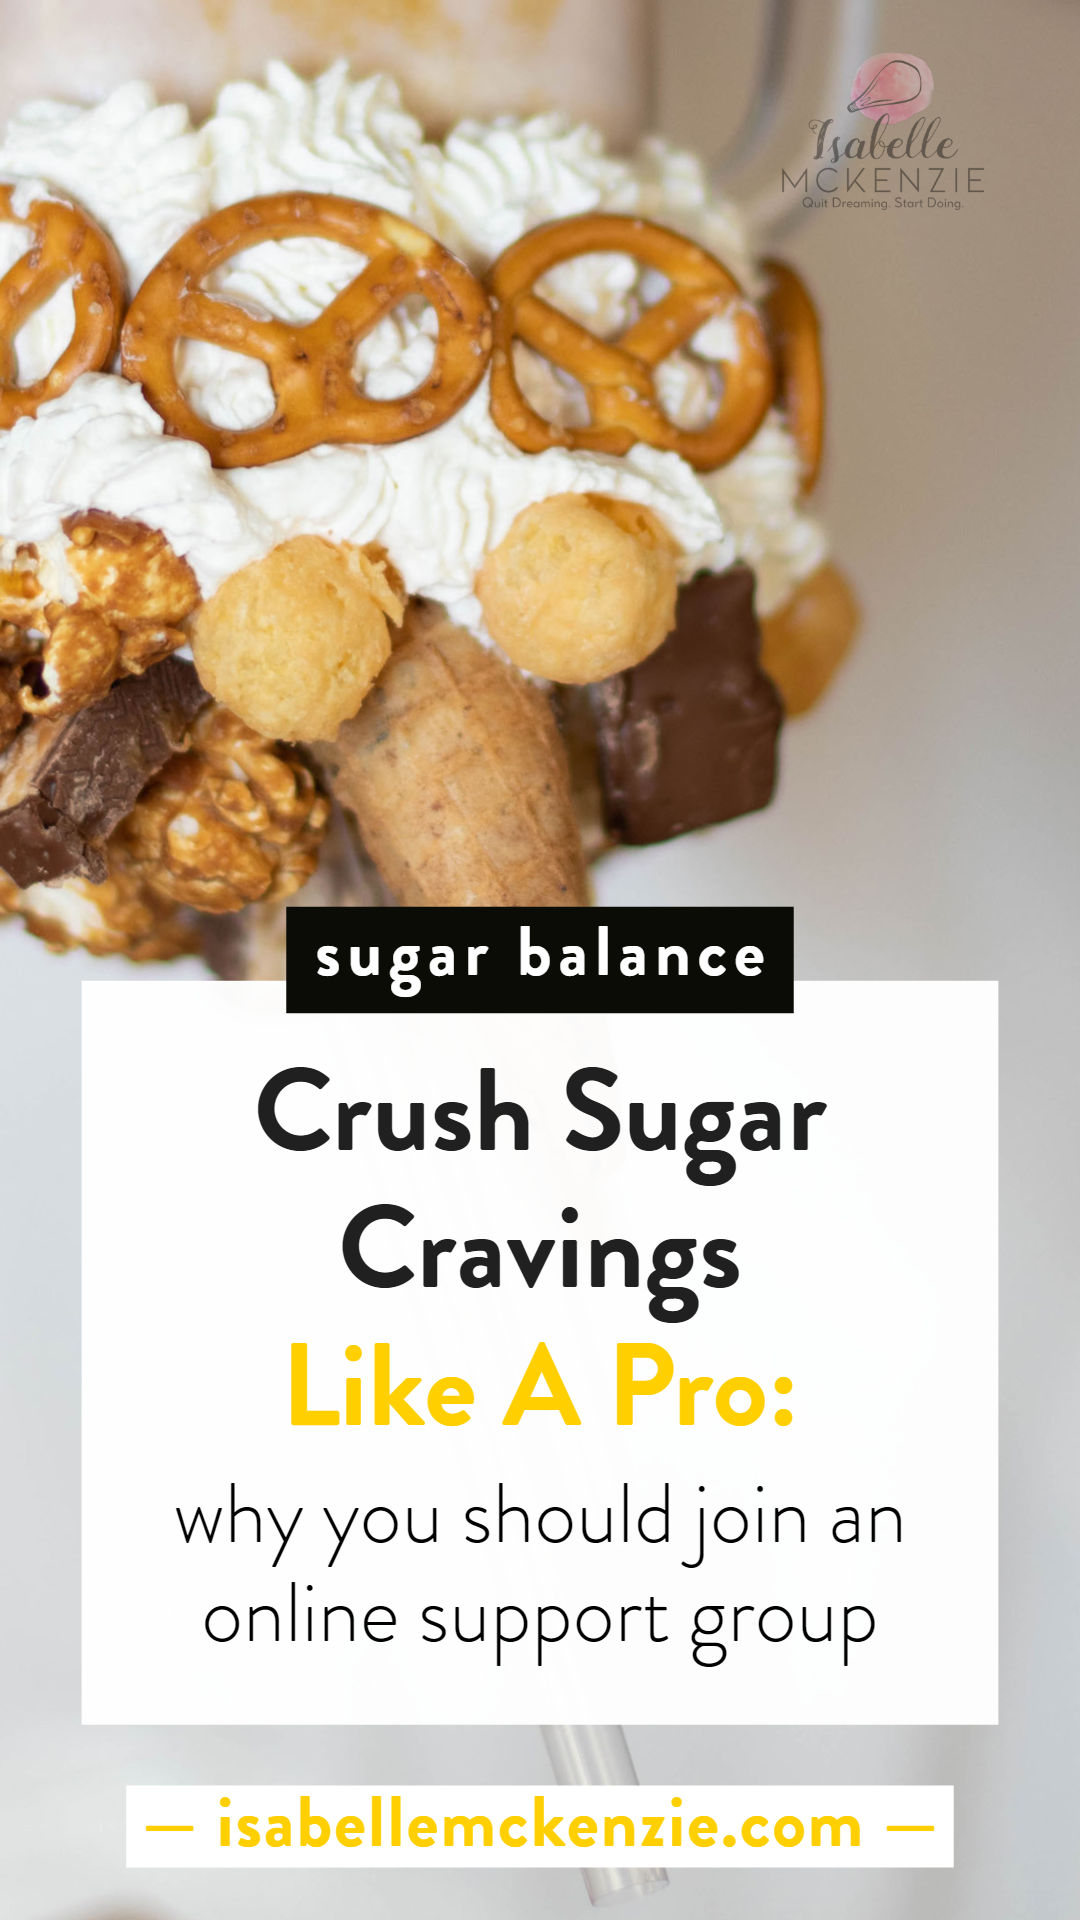 Crush Sugar Cravings Like A Pro_ Join An Online Support Group - Isabelle McKenzie.png